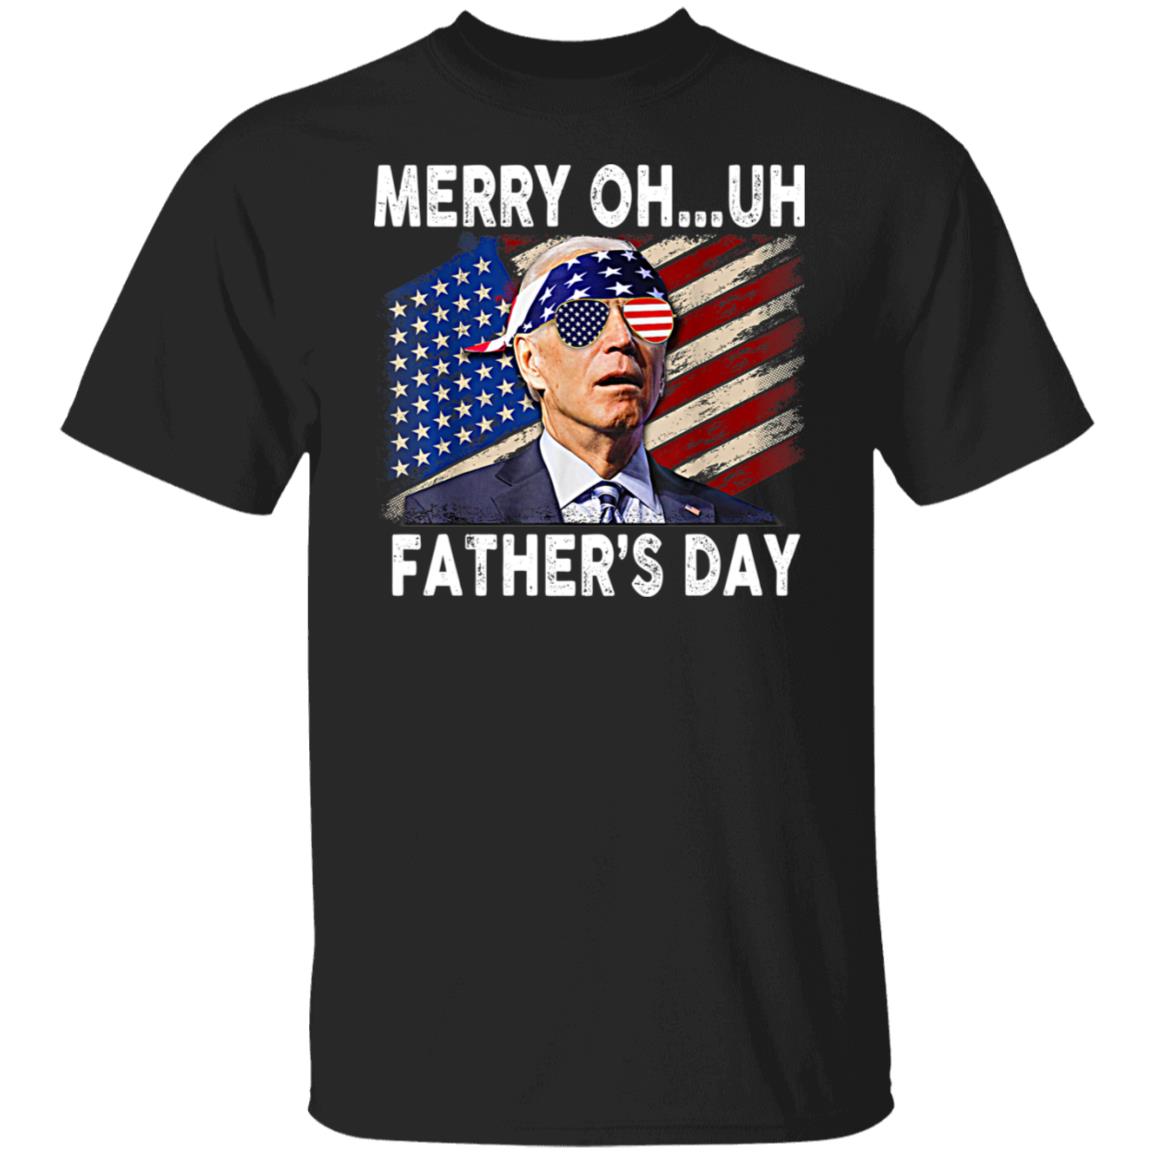 Merry Oh Uh Father's Day Funny Independence Day 4th July Shirt